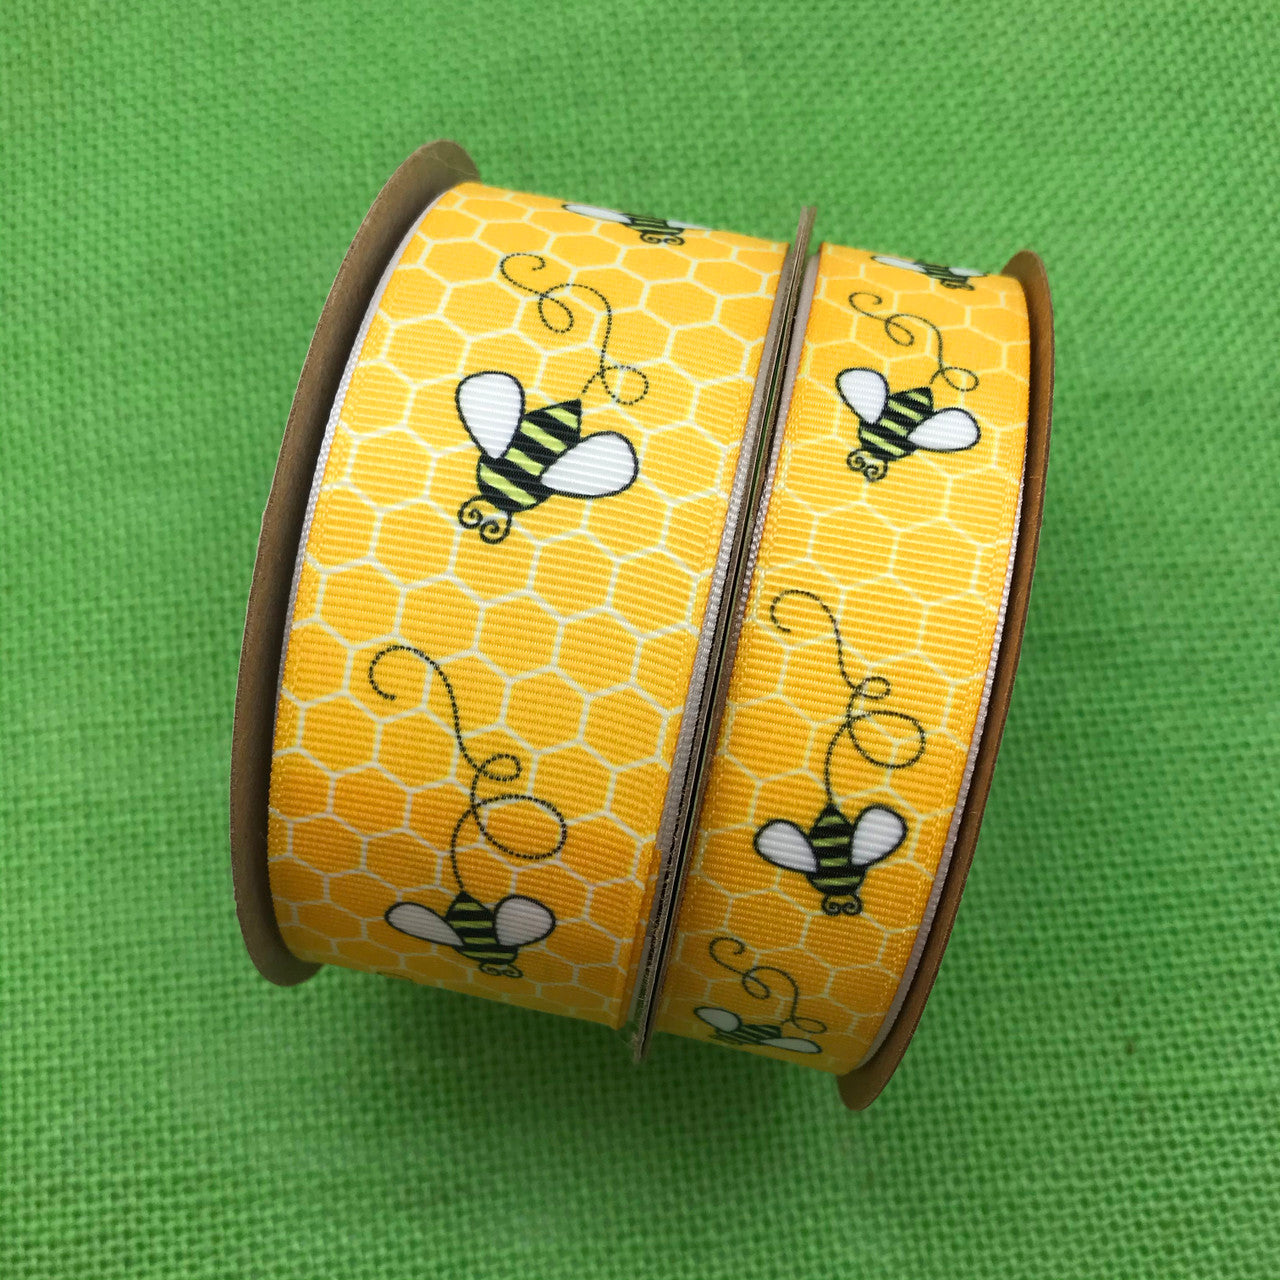 Our buzzing bees are offered in two sizes in grosgrain for your projects large and small. This ribbon is offered on 7/8" and 1.5" widths!